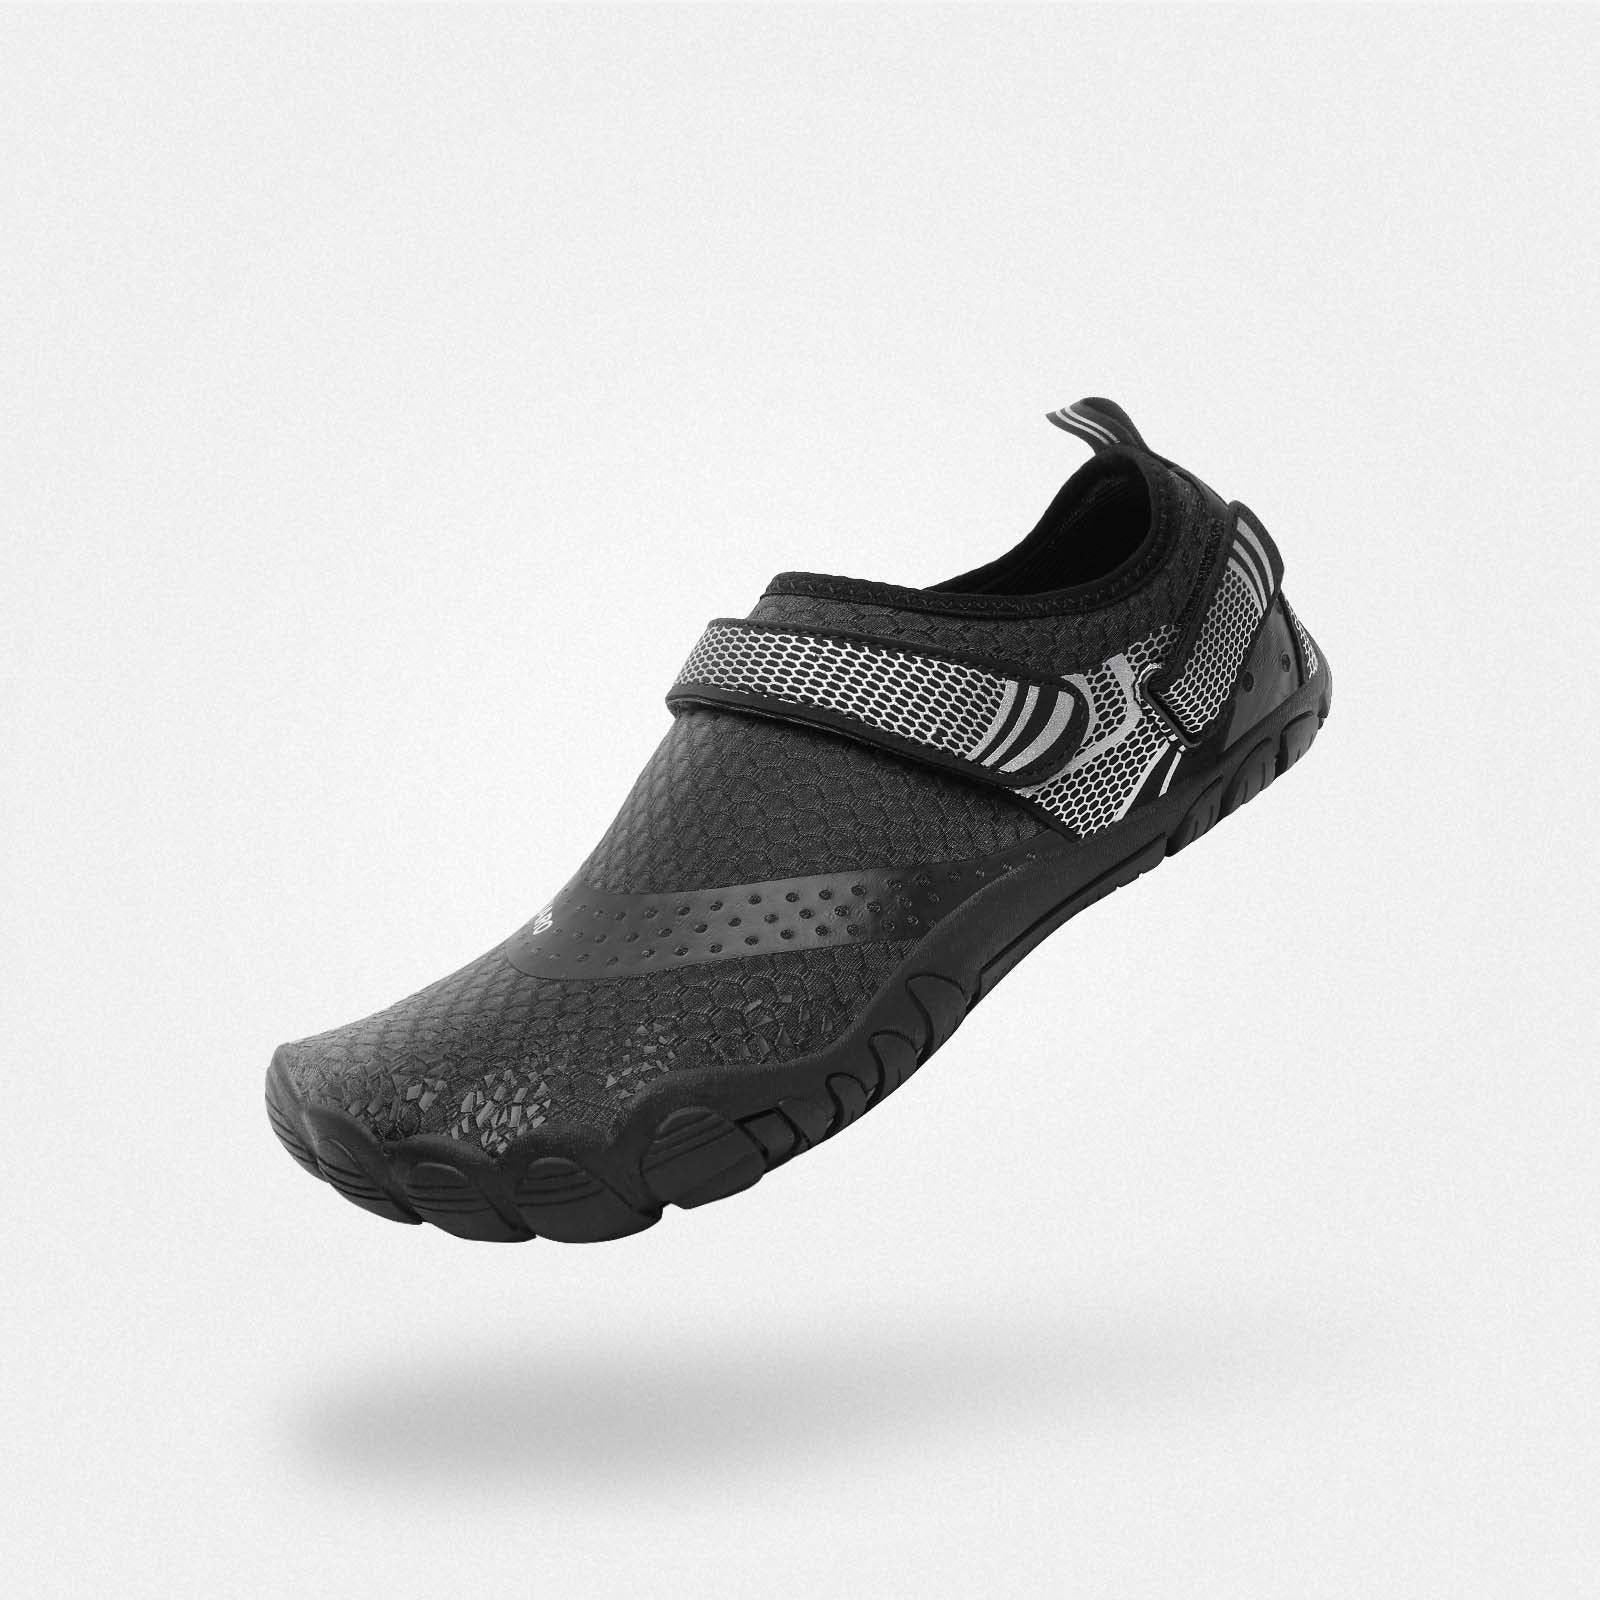 Active IV - Barefoot Shoes - Keep Unrestrained - SAGUARO®